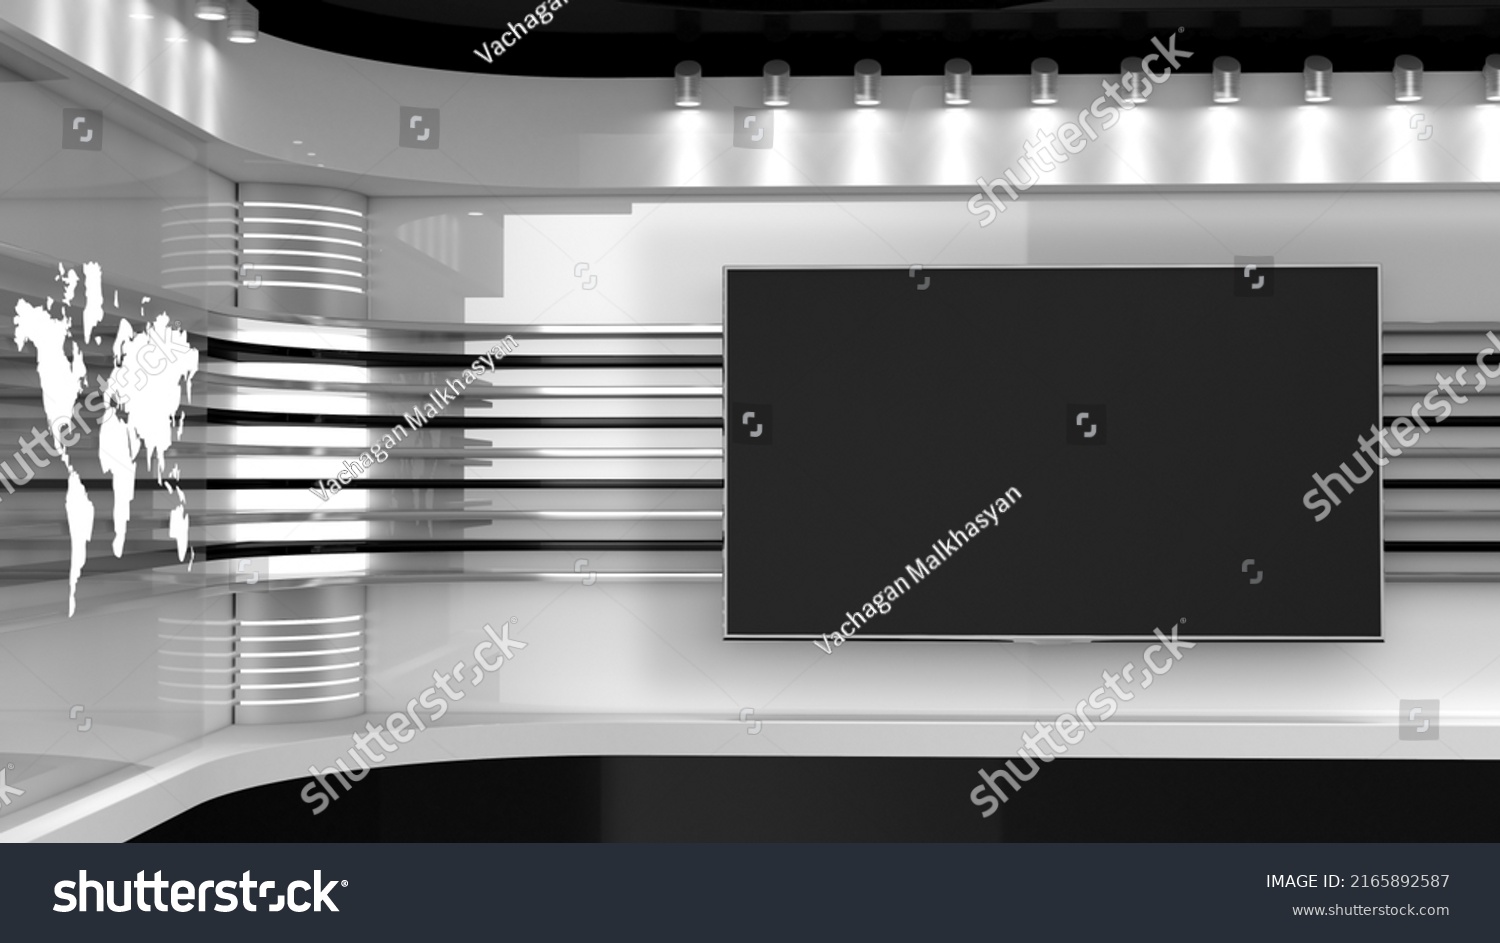 Stock Photo Tv Studio Backdrop For Tv Shows White Background Tv On Wall News Studio The Perfect Backdrop 2165892587 